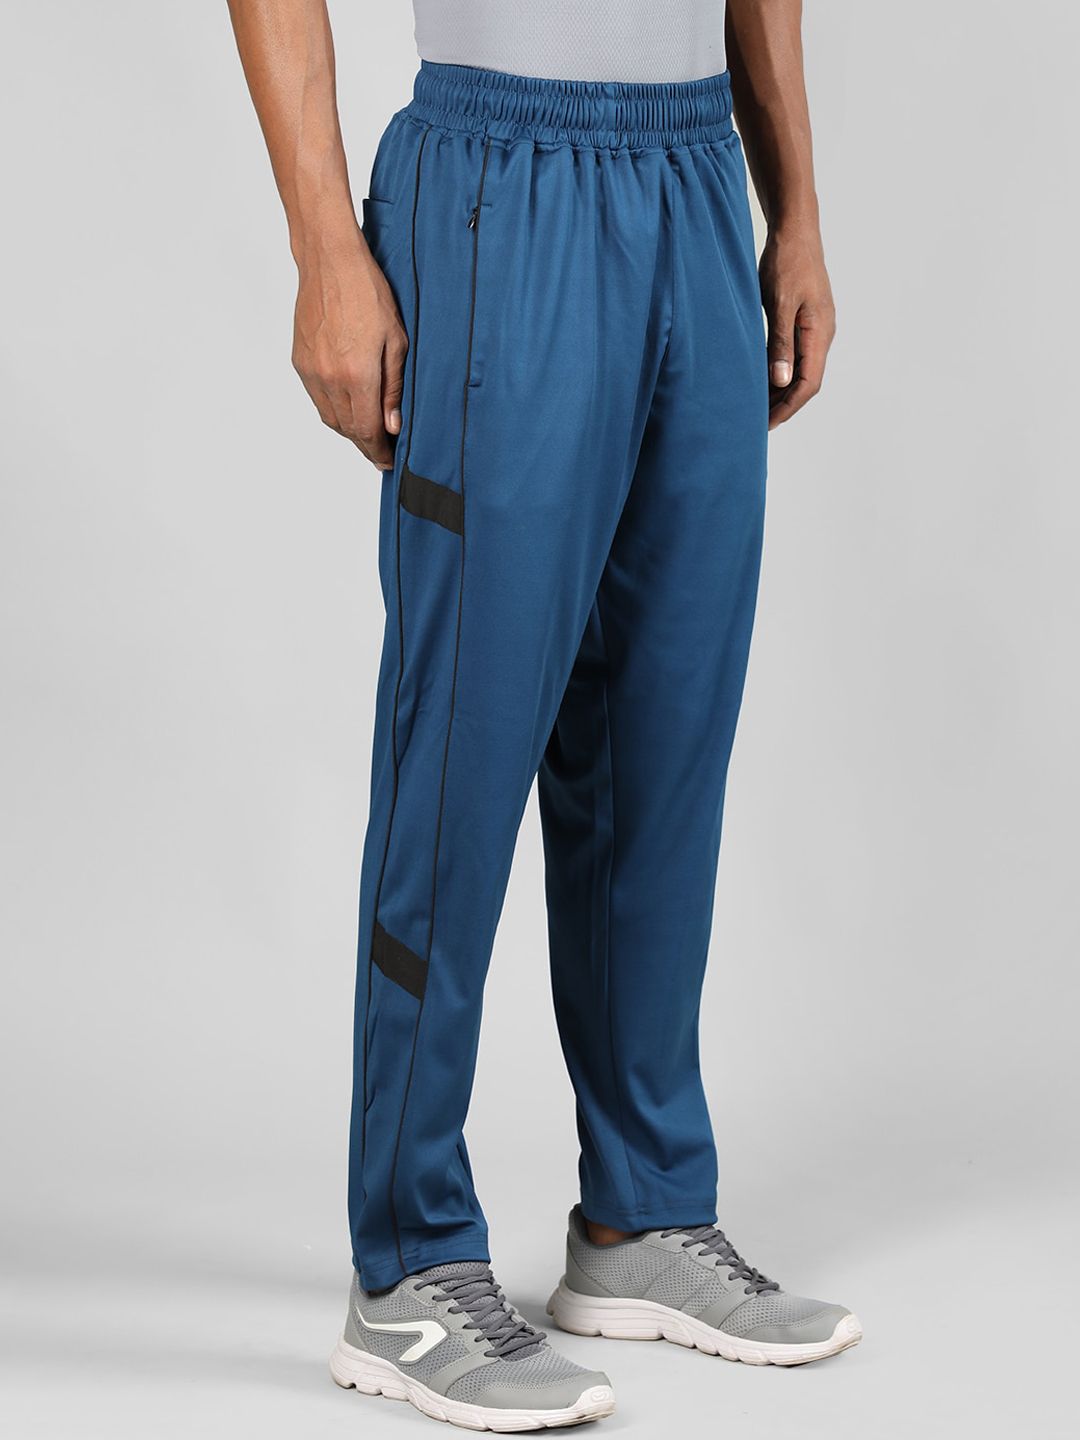 CHKOKKO Men's Loose Fit Polyester Trackpants